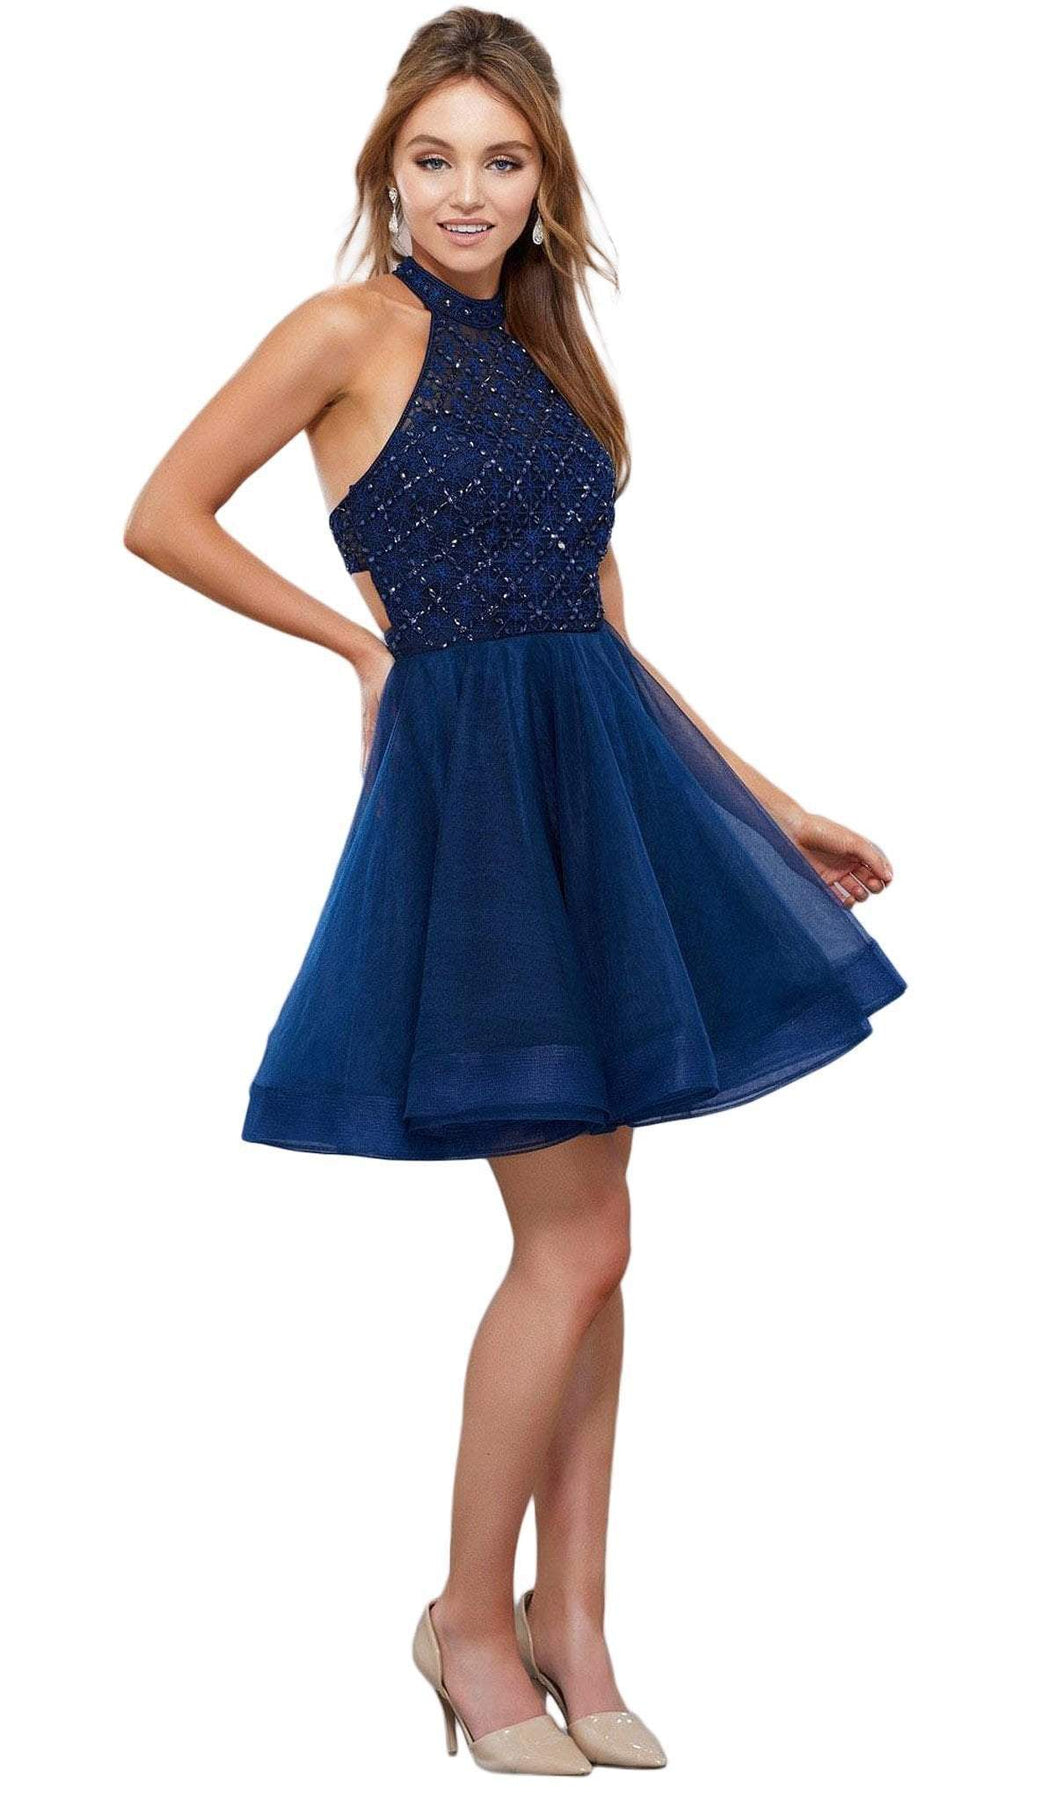 Nox Anabel - 6316 Illusion High Halter A-line Dress Special Occasion Dress XS / Navy